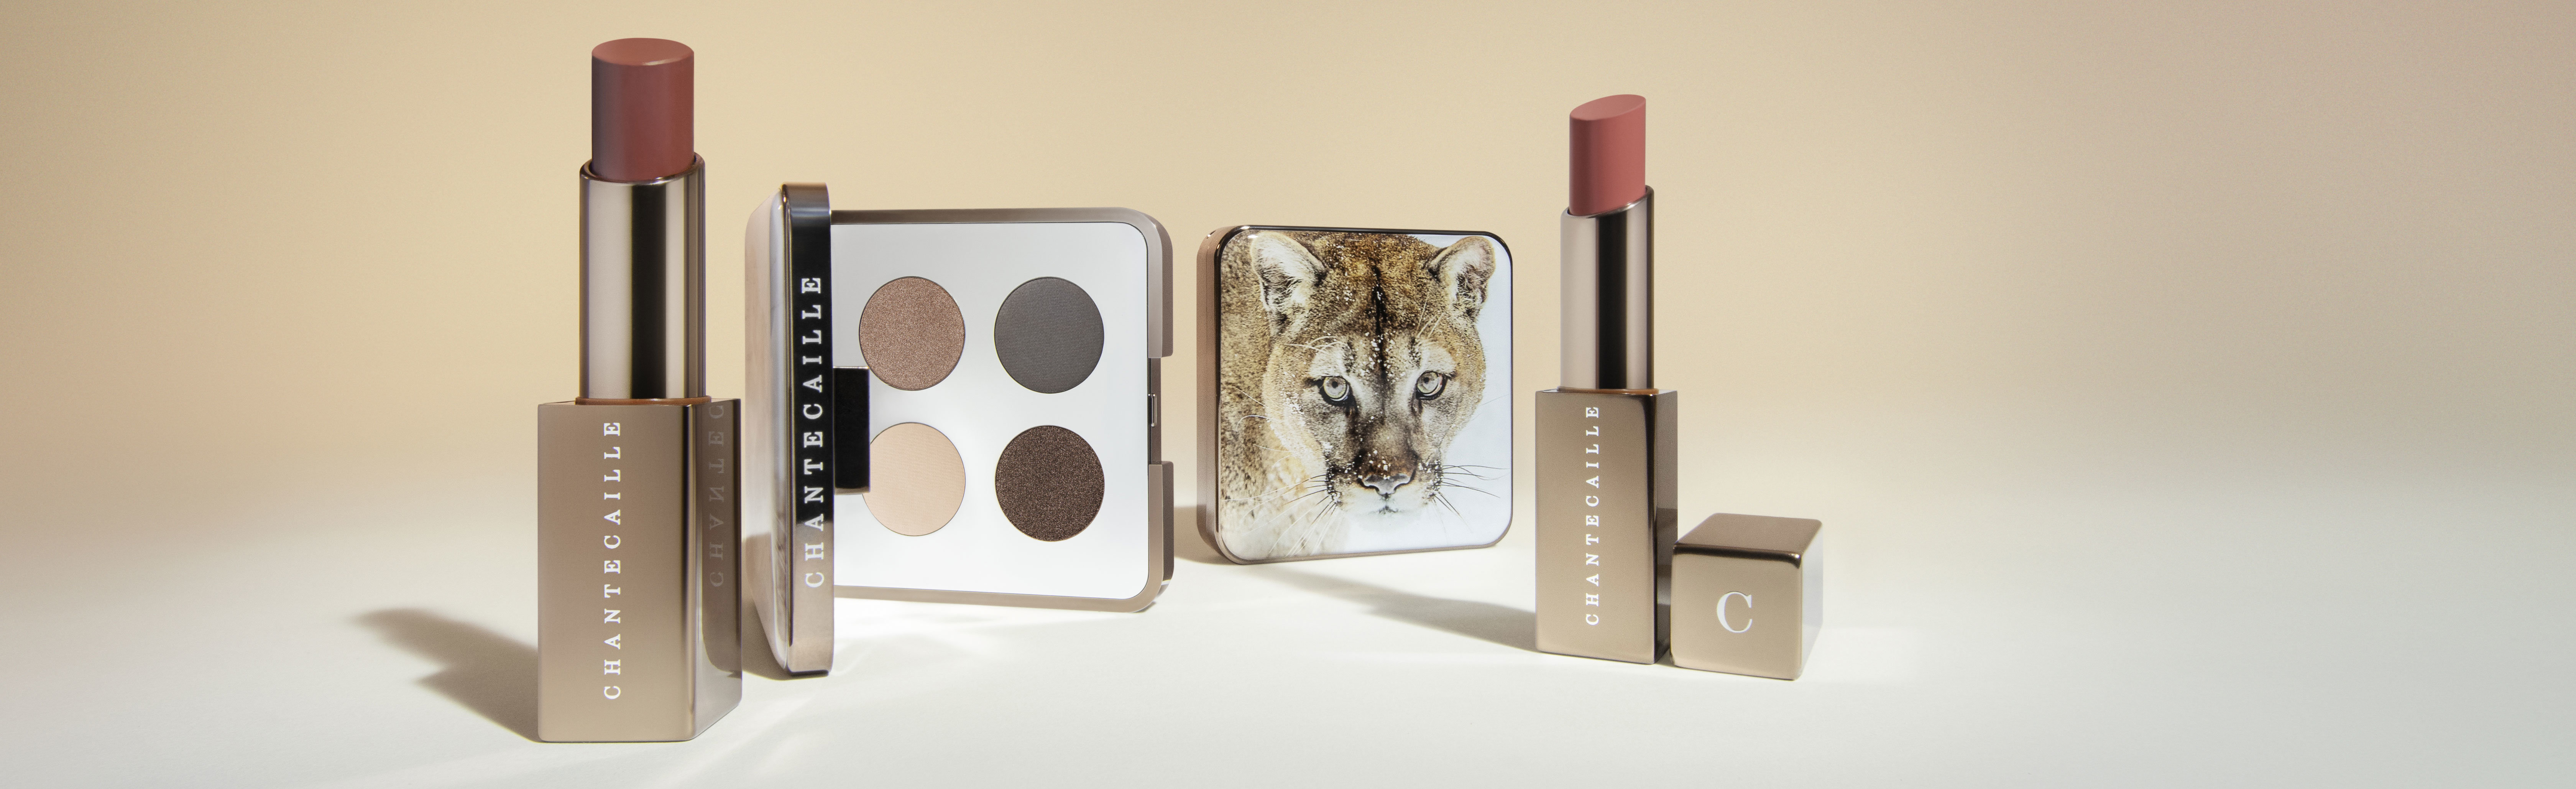 Shop the Cougar Collection on Beautylish.com